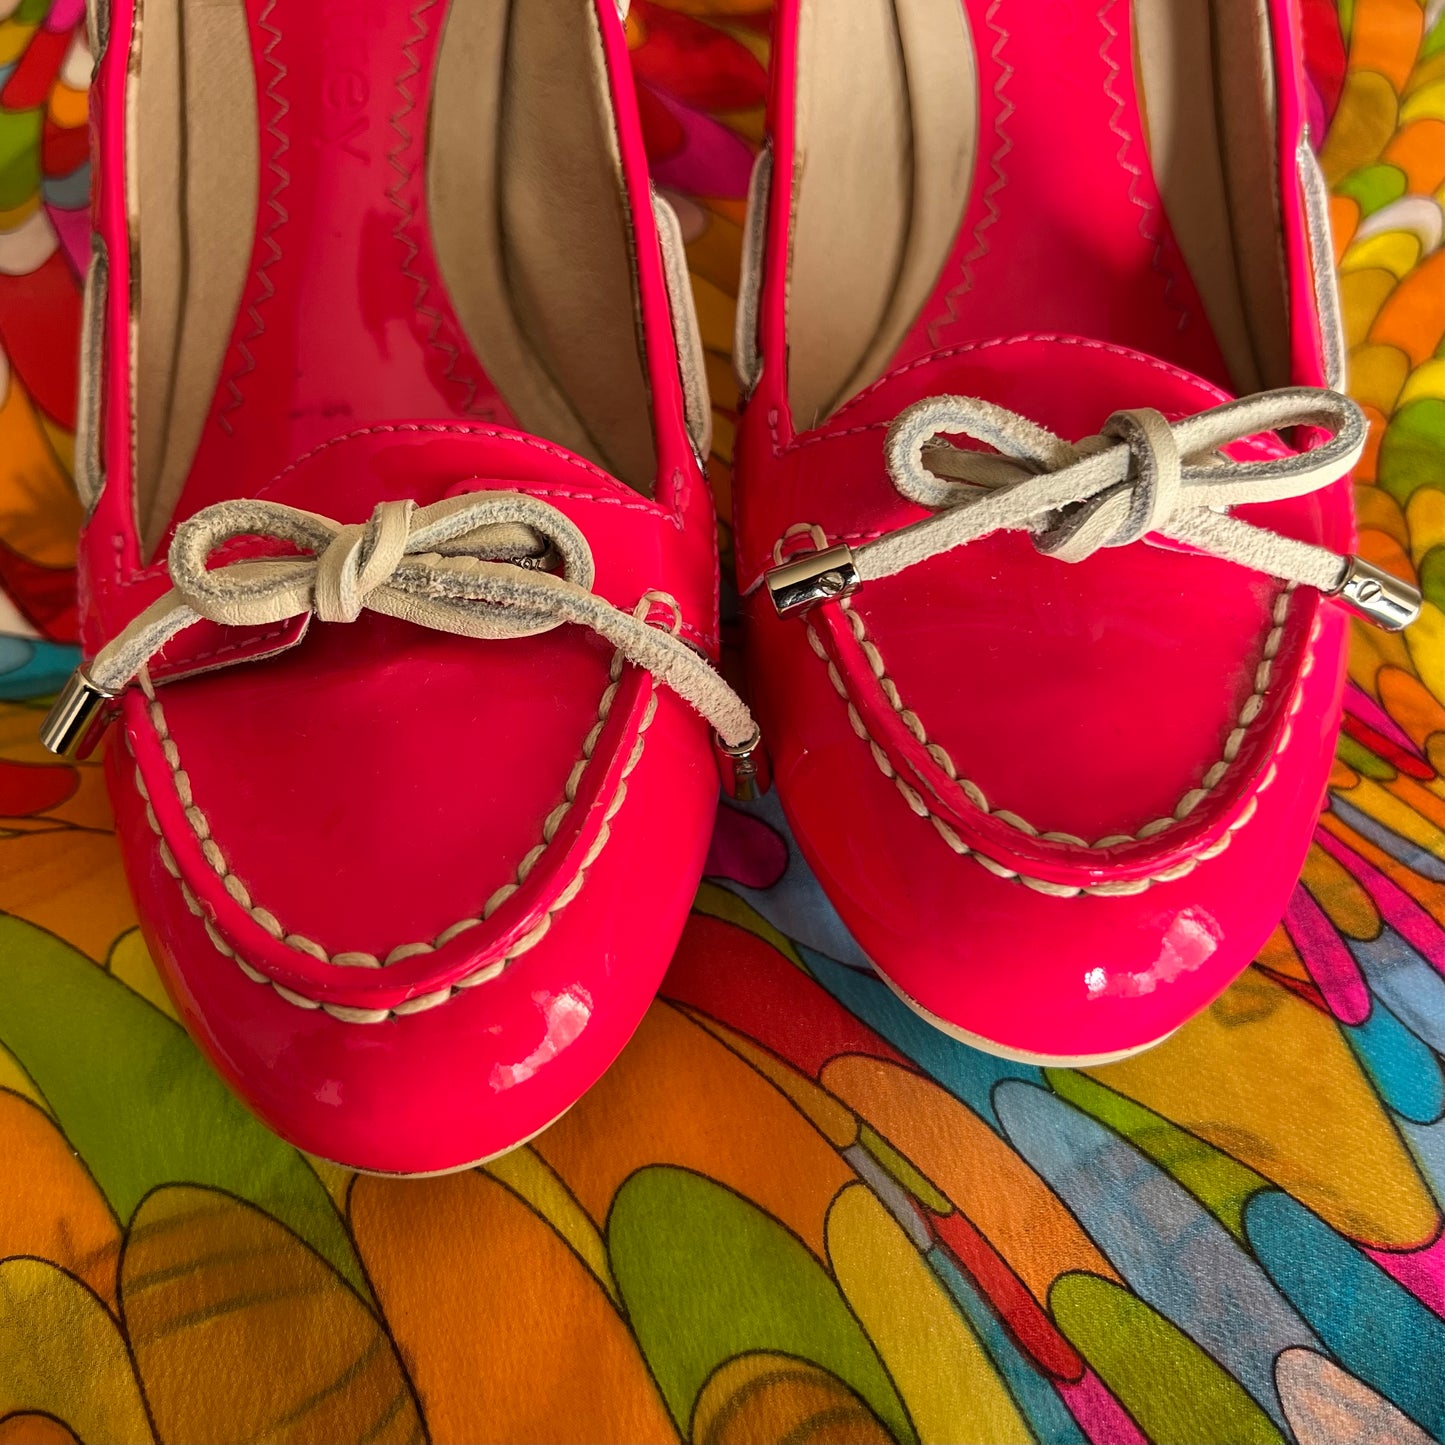 Hot Pink Jeffrey Sperry Top-Sider Patent Leather Chunky Heels-Size 8M